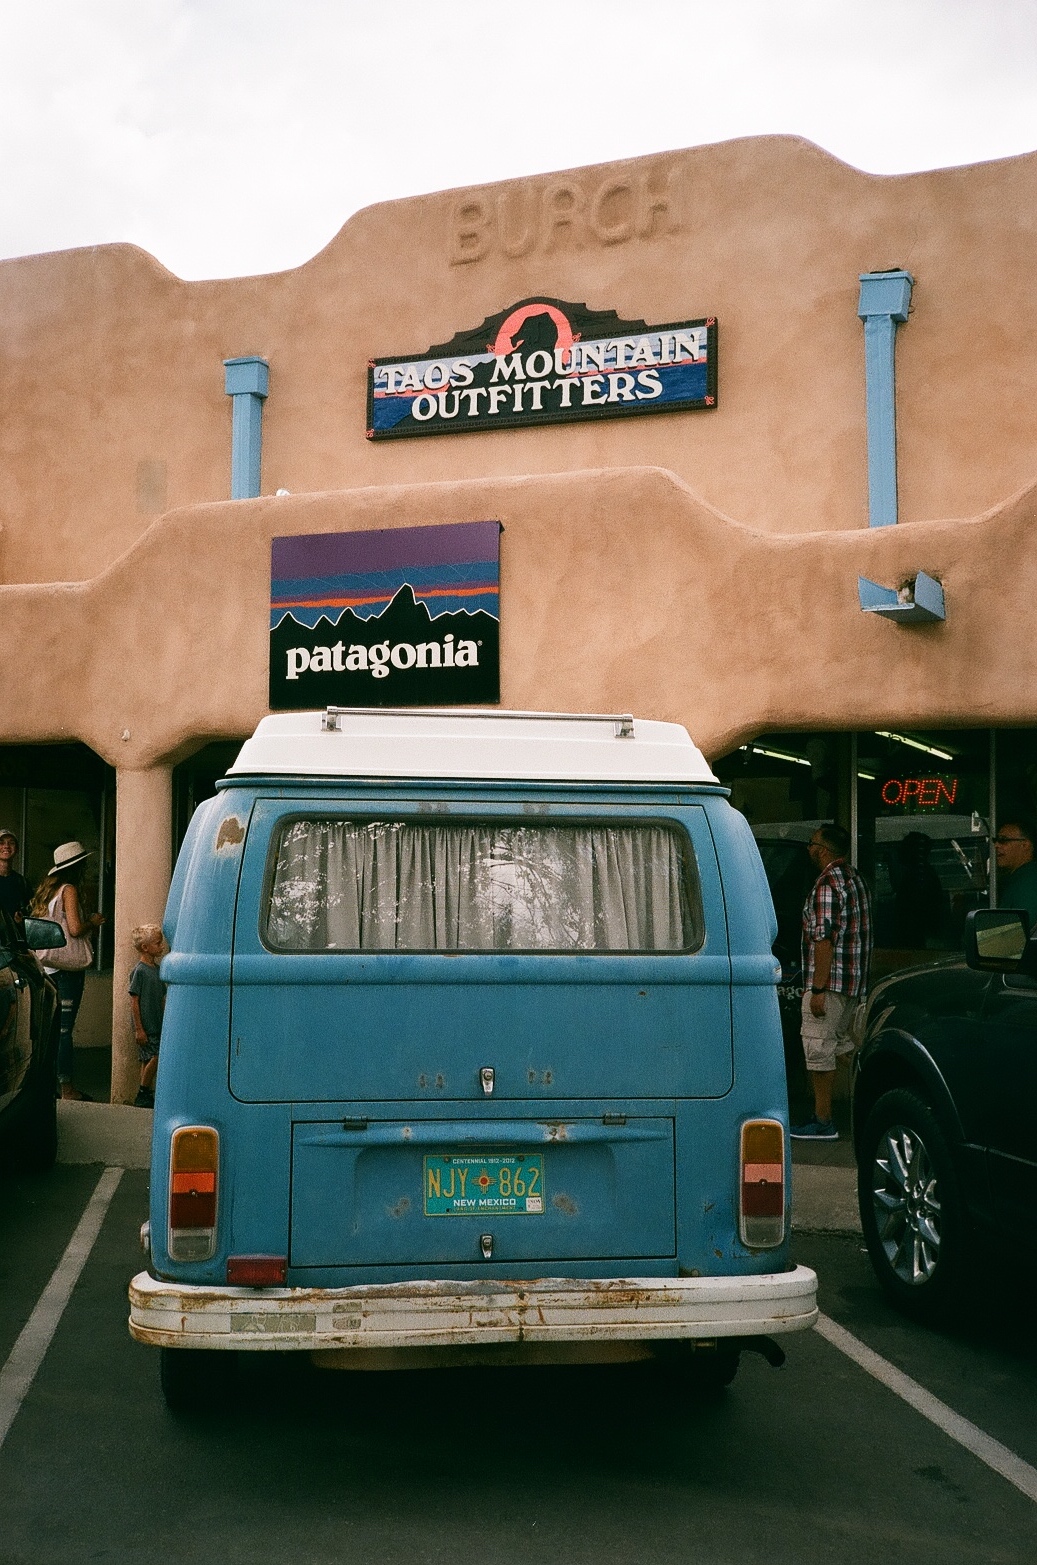 VW Campervan in front of Patagonia sign at Taos Mountain Outfitters in the Plaza | 35mm photograph shot on Nikon L35af | Kodak Gold 200